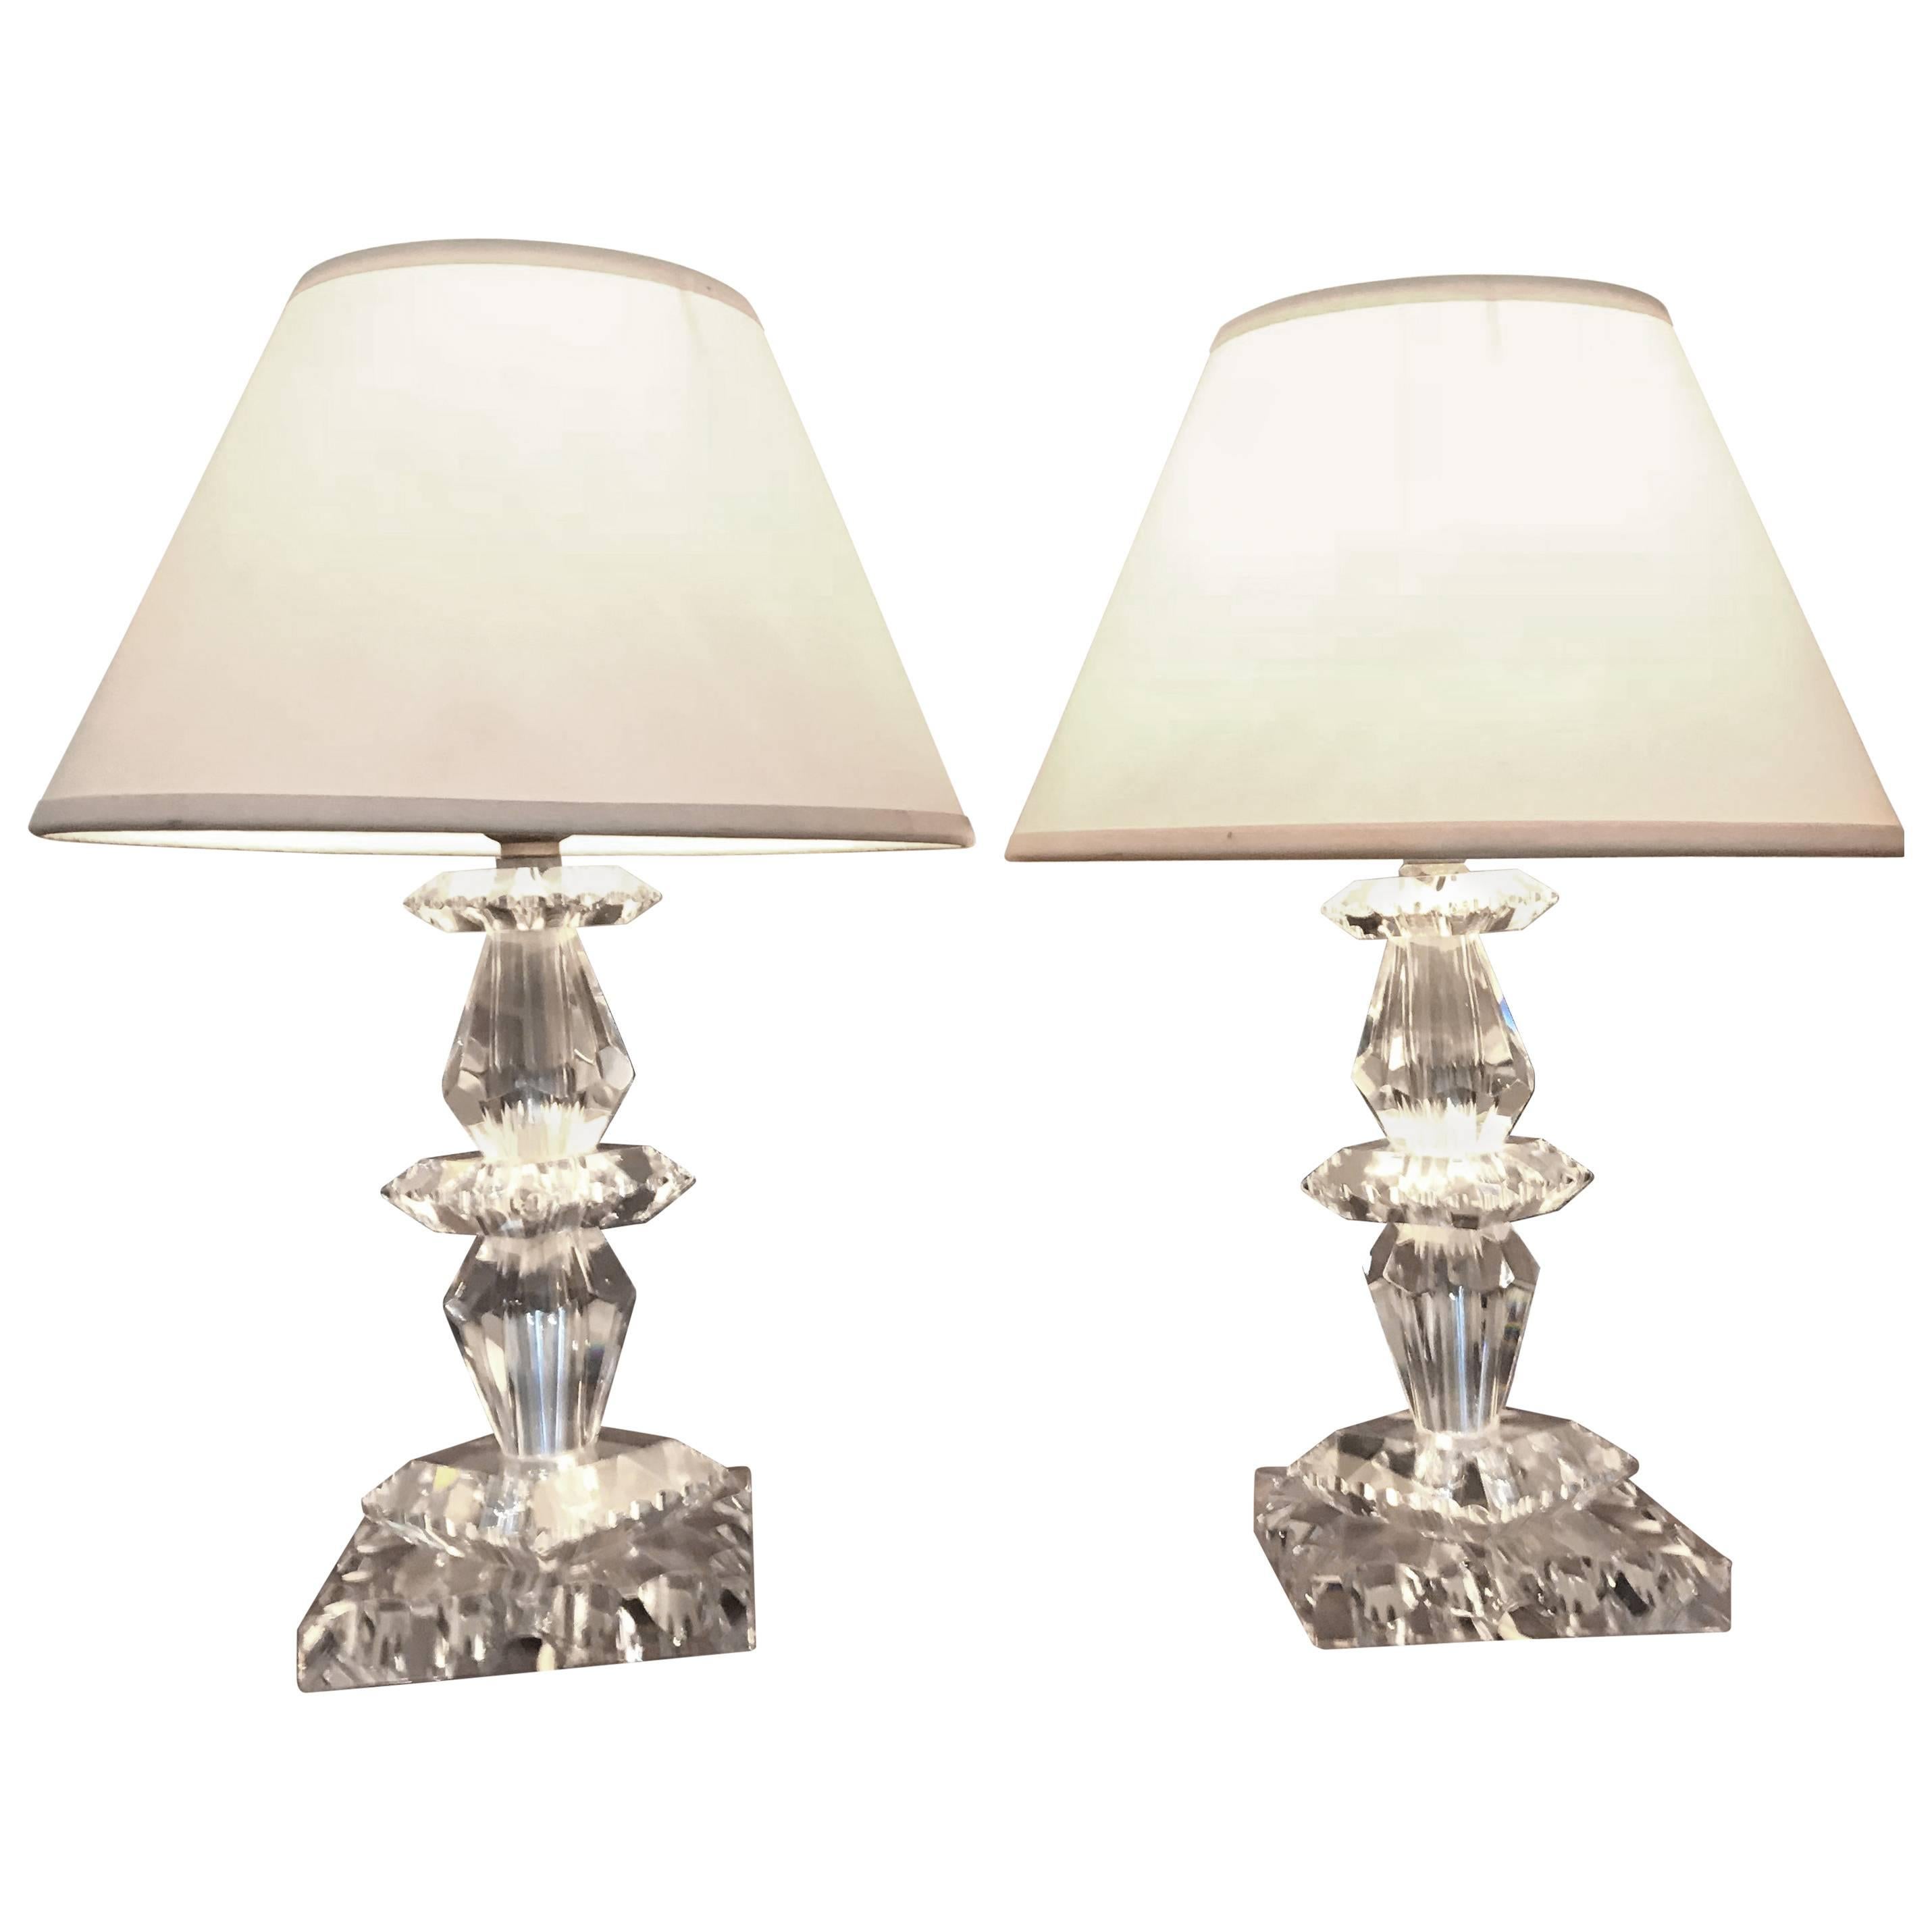 Pair of Art Deco Lamps by Baccarat, France circa 1940, Attr. to Jacques Adnet